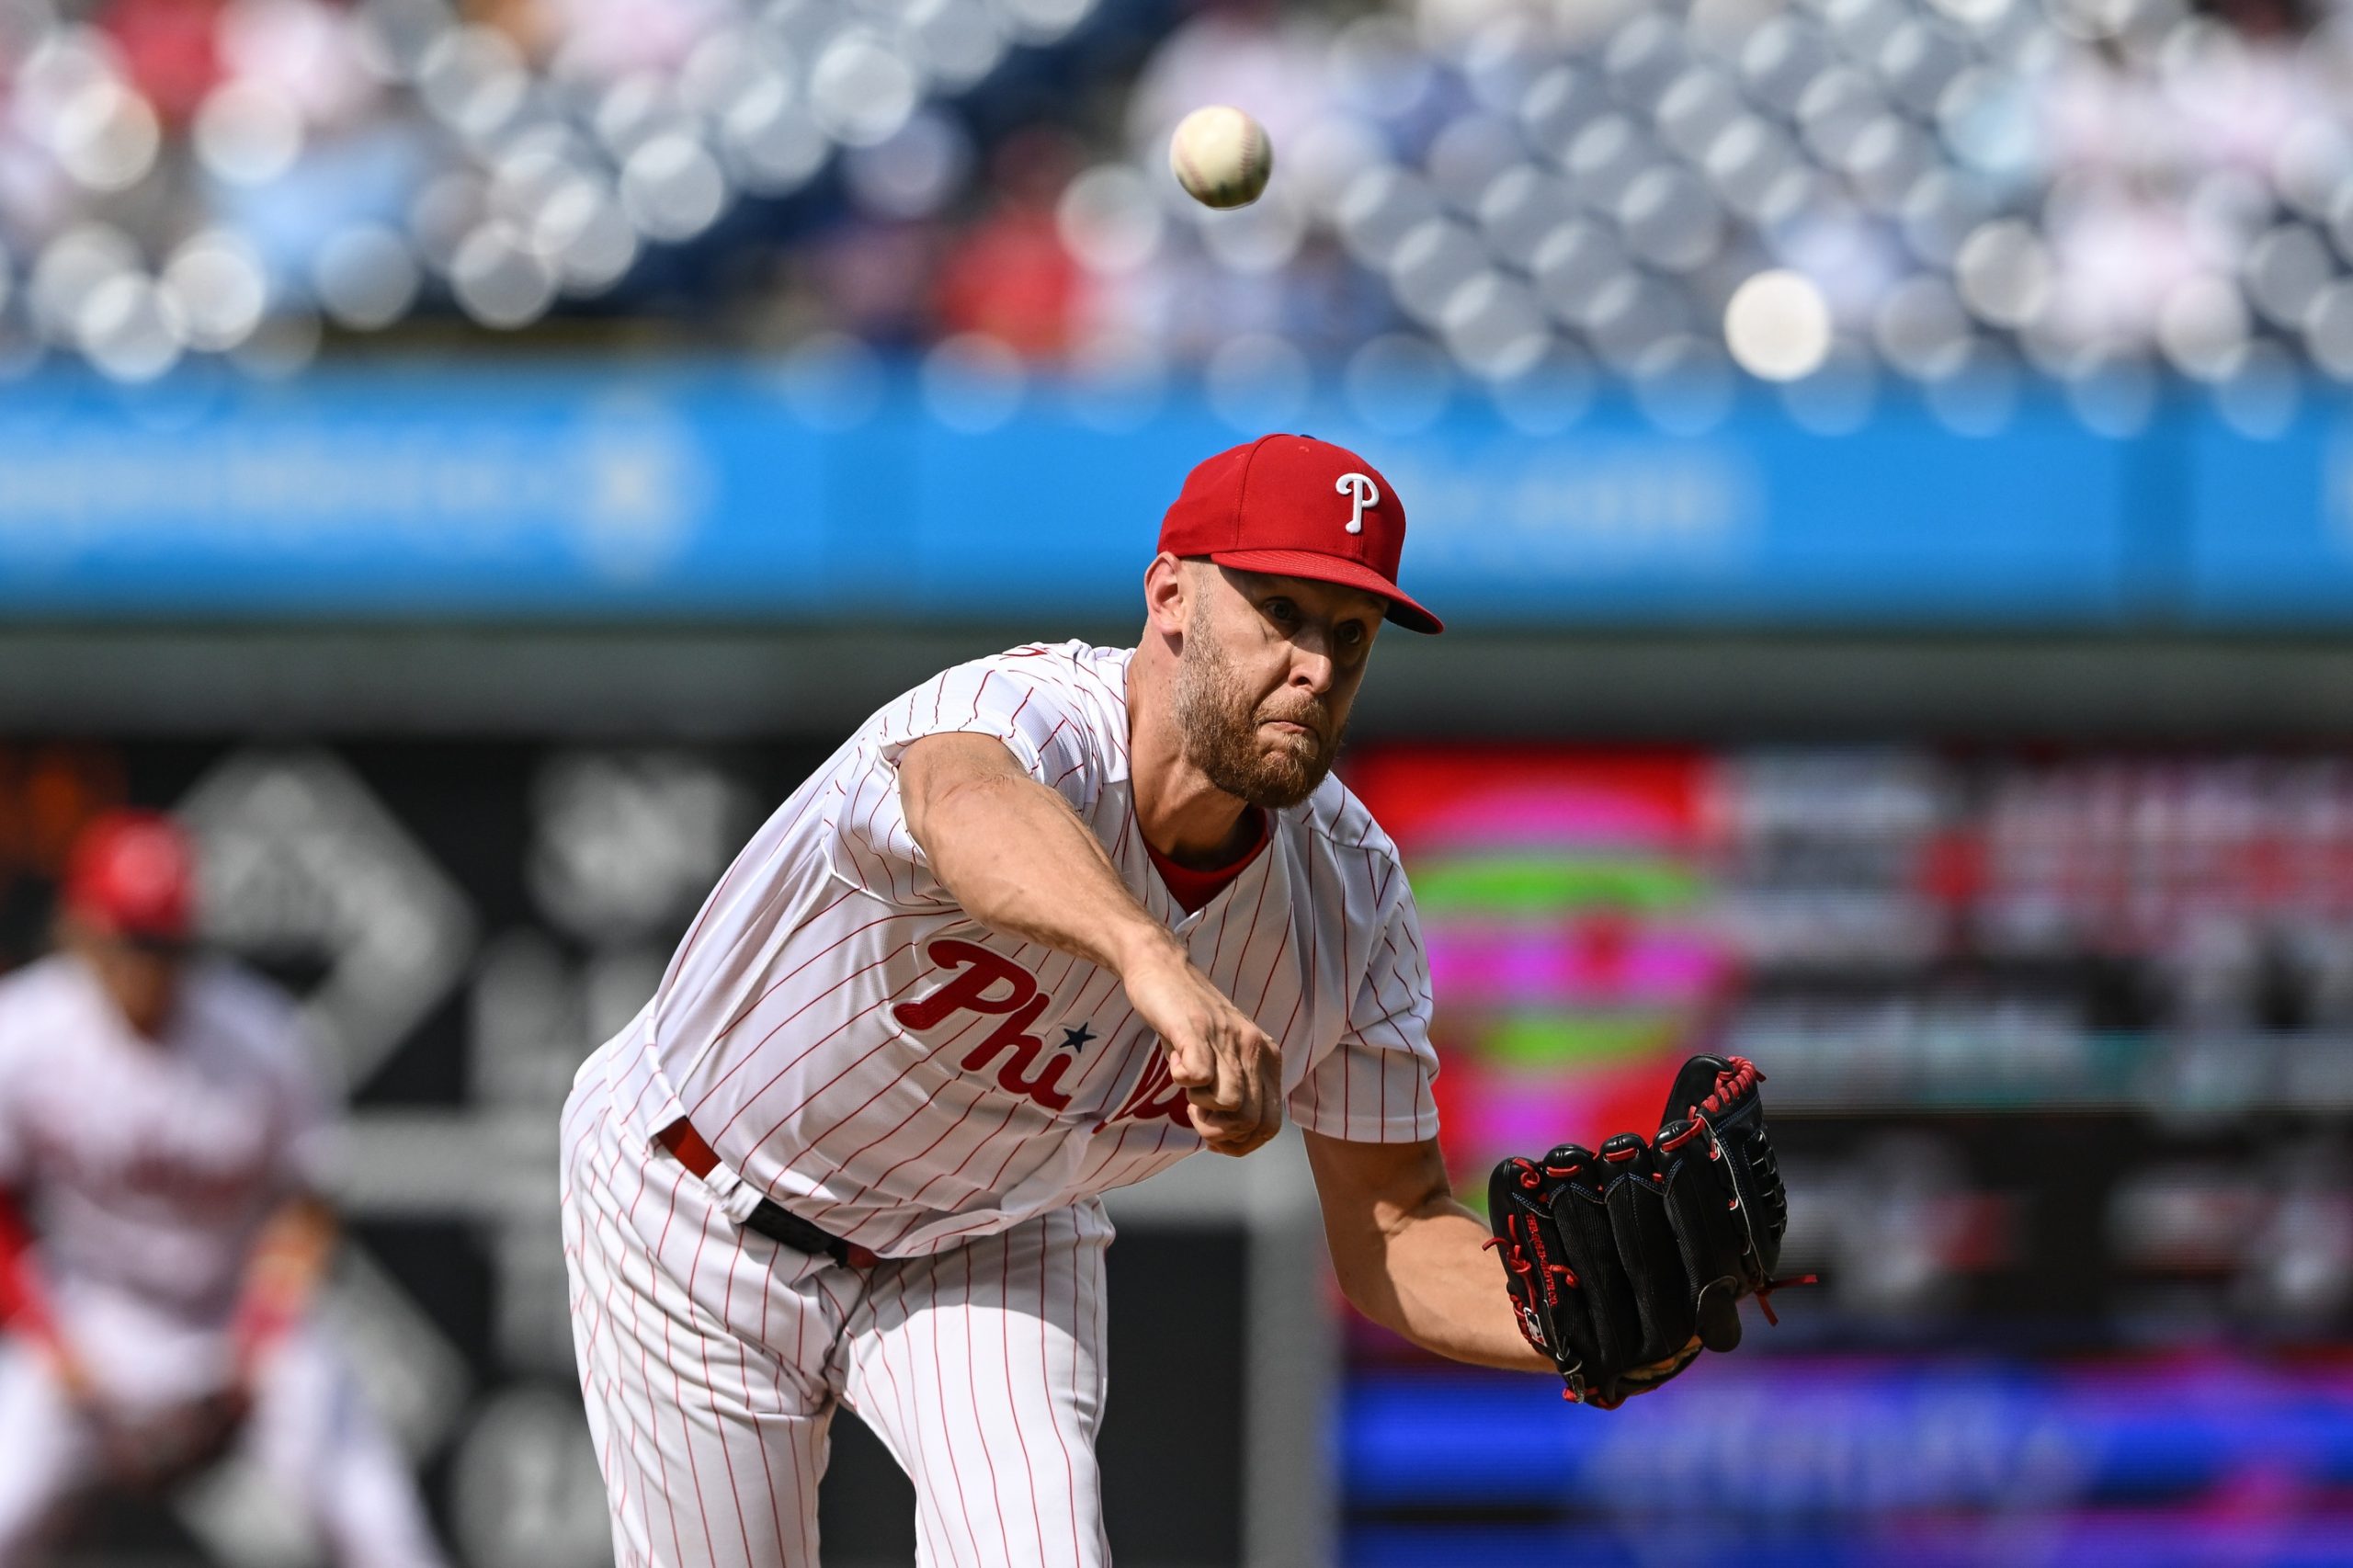 Battle of the East: Phillies vs Blue Jays in Exciting Showdown